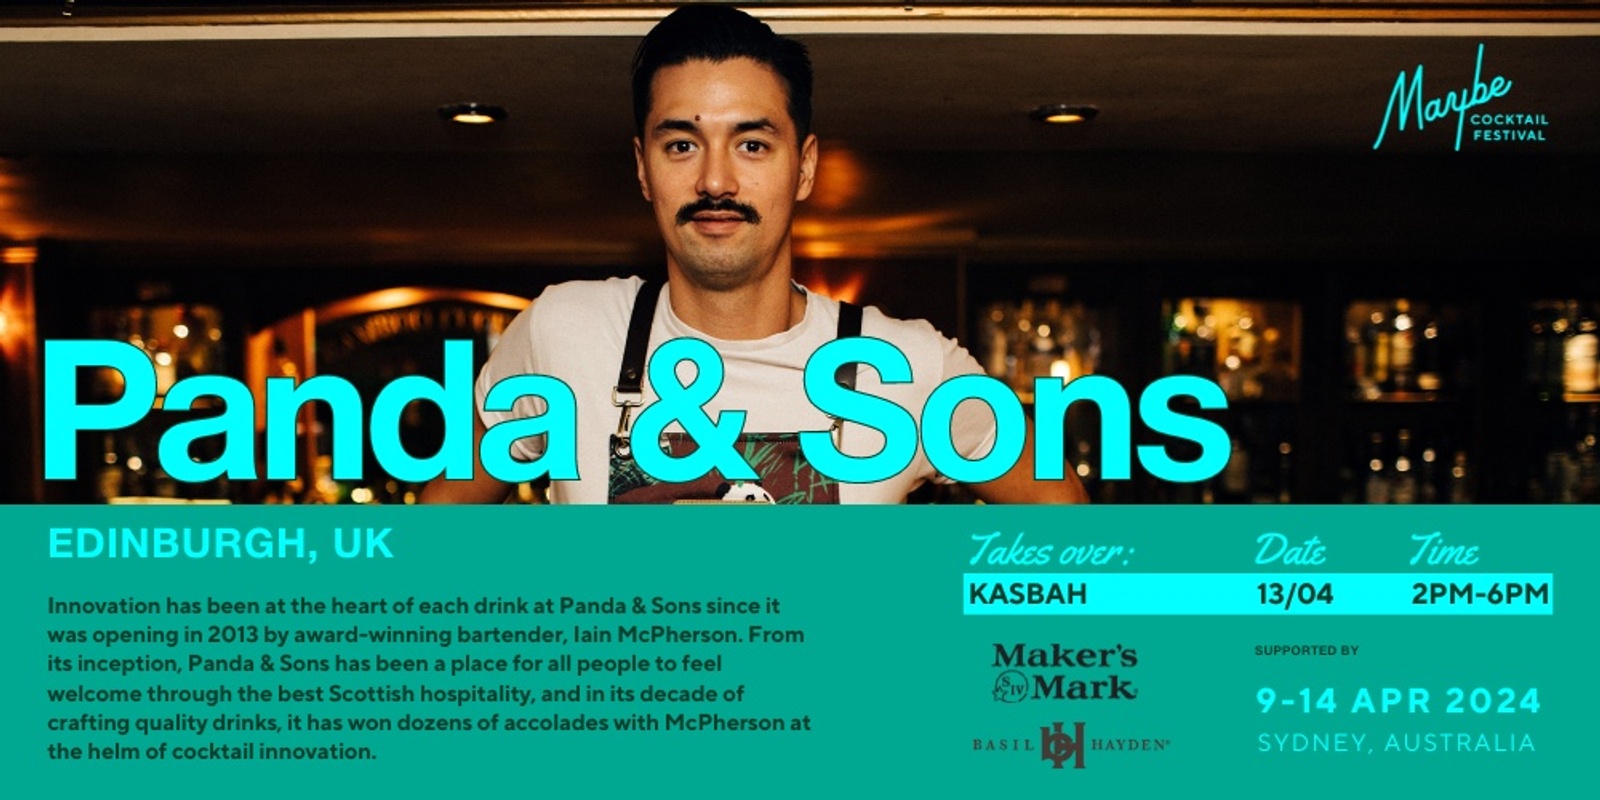 Banner image for Maybe Cocktail Festival: Panda & Sons Takes Over KASBAH